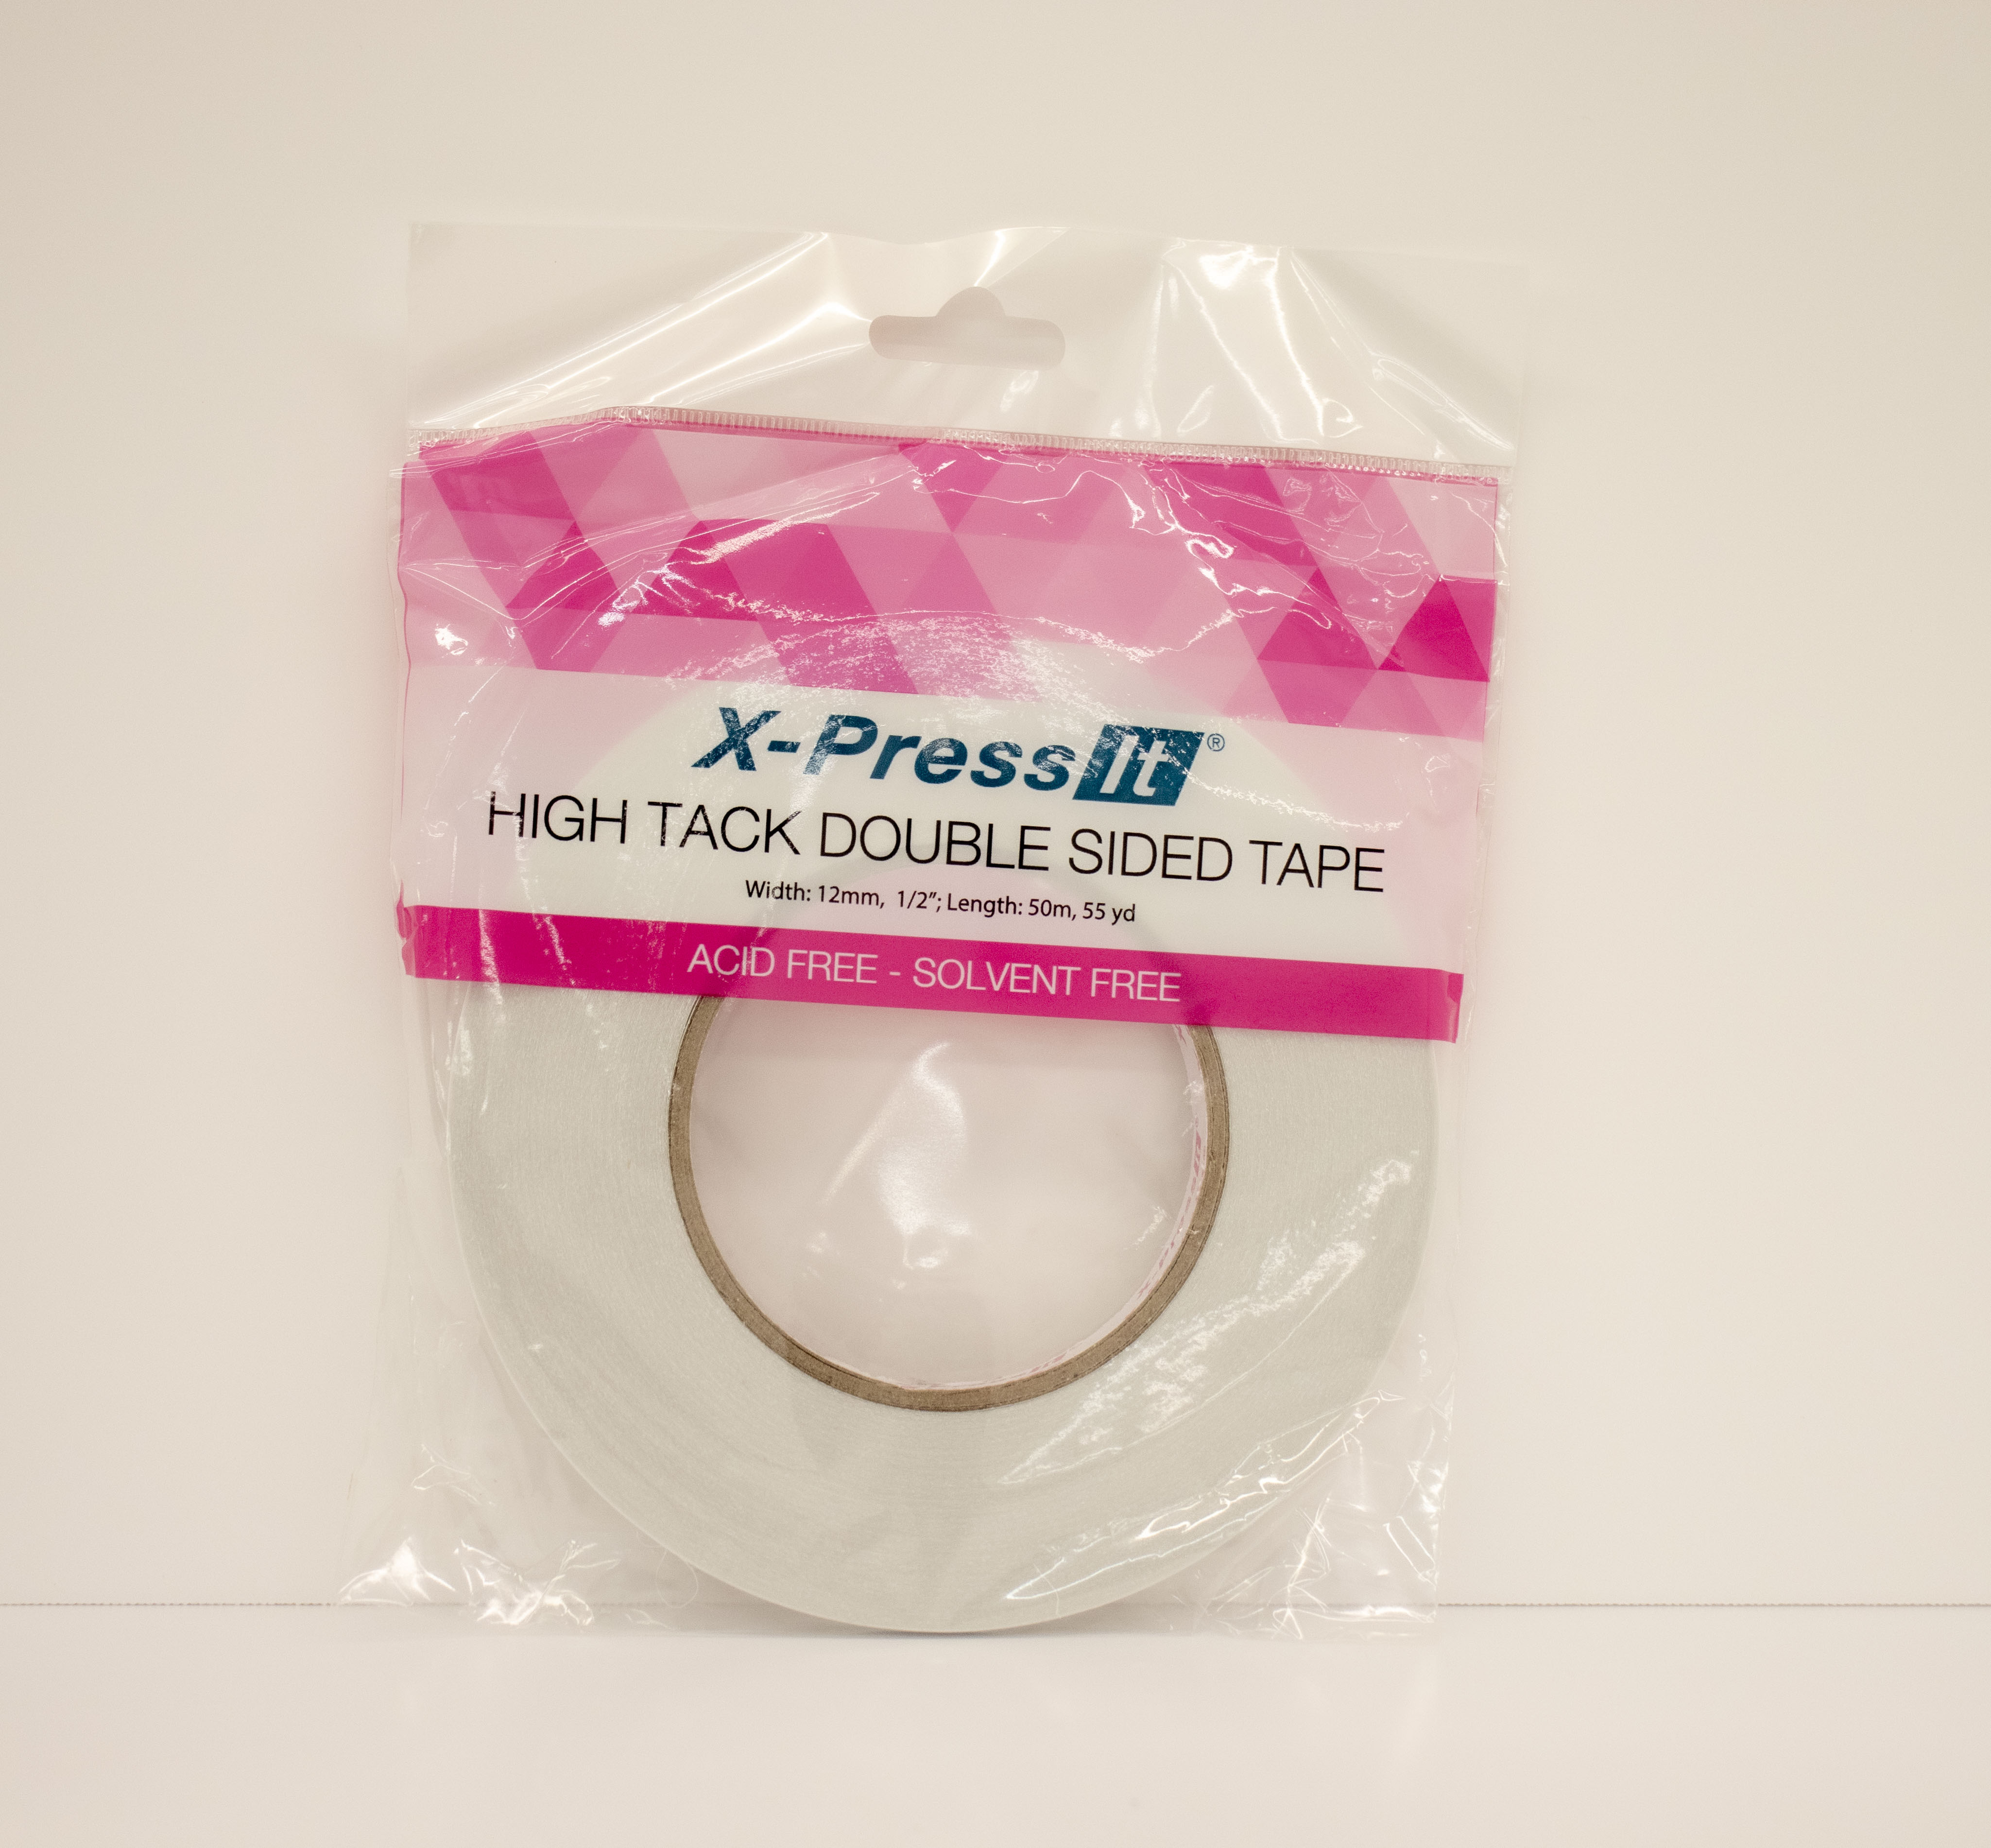 X-Press It High Tack Double-Sided Tissue Tape - 1/2" x 55yd roll